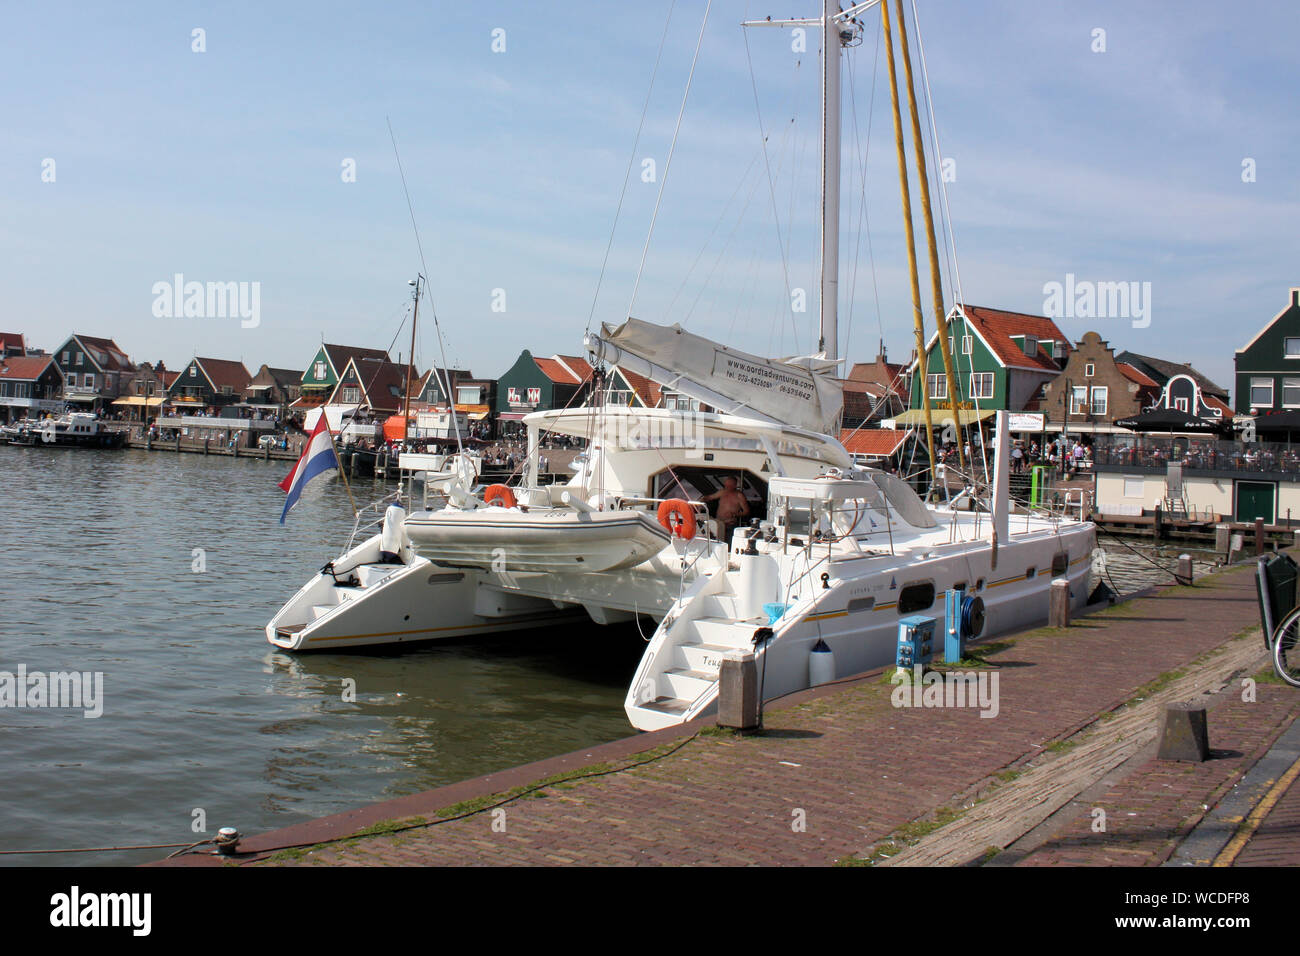 A sport yacht is docking at the pier in front of the fisherman traditional wooden houses in Volendam village on a sunny day. Stock Photo